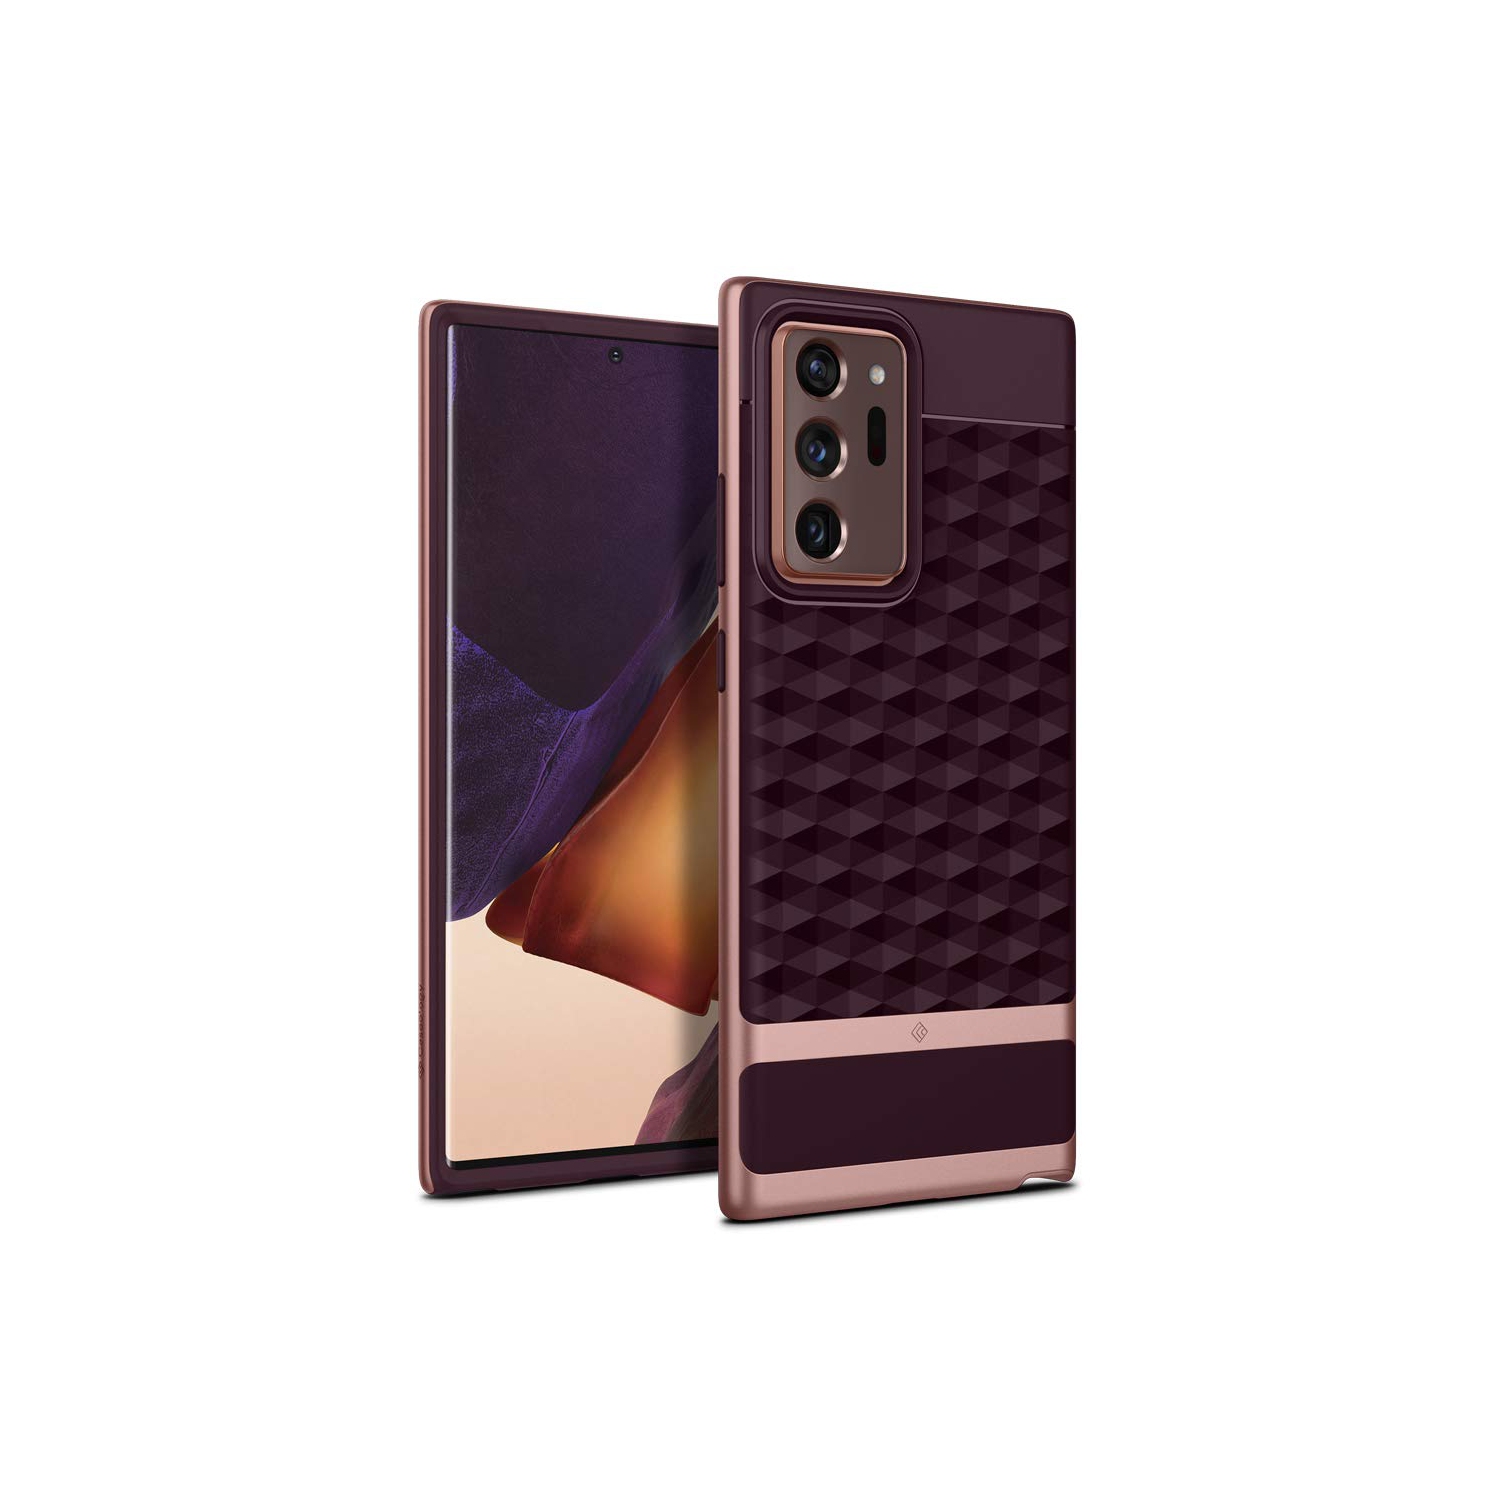 Caseology Parallax for Samsung Galaxy Note 20 Ultra Case (2020) 5G - Burgundy